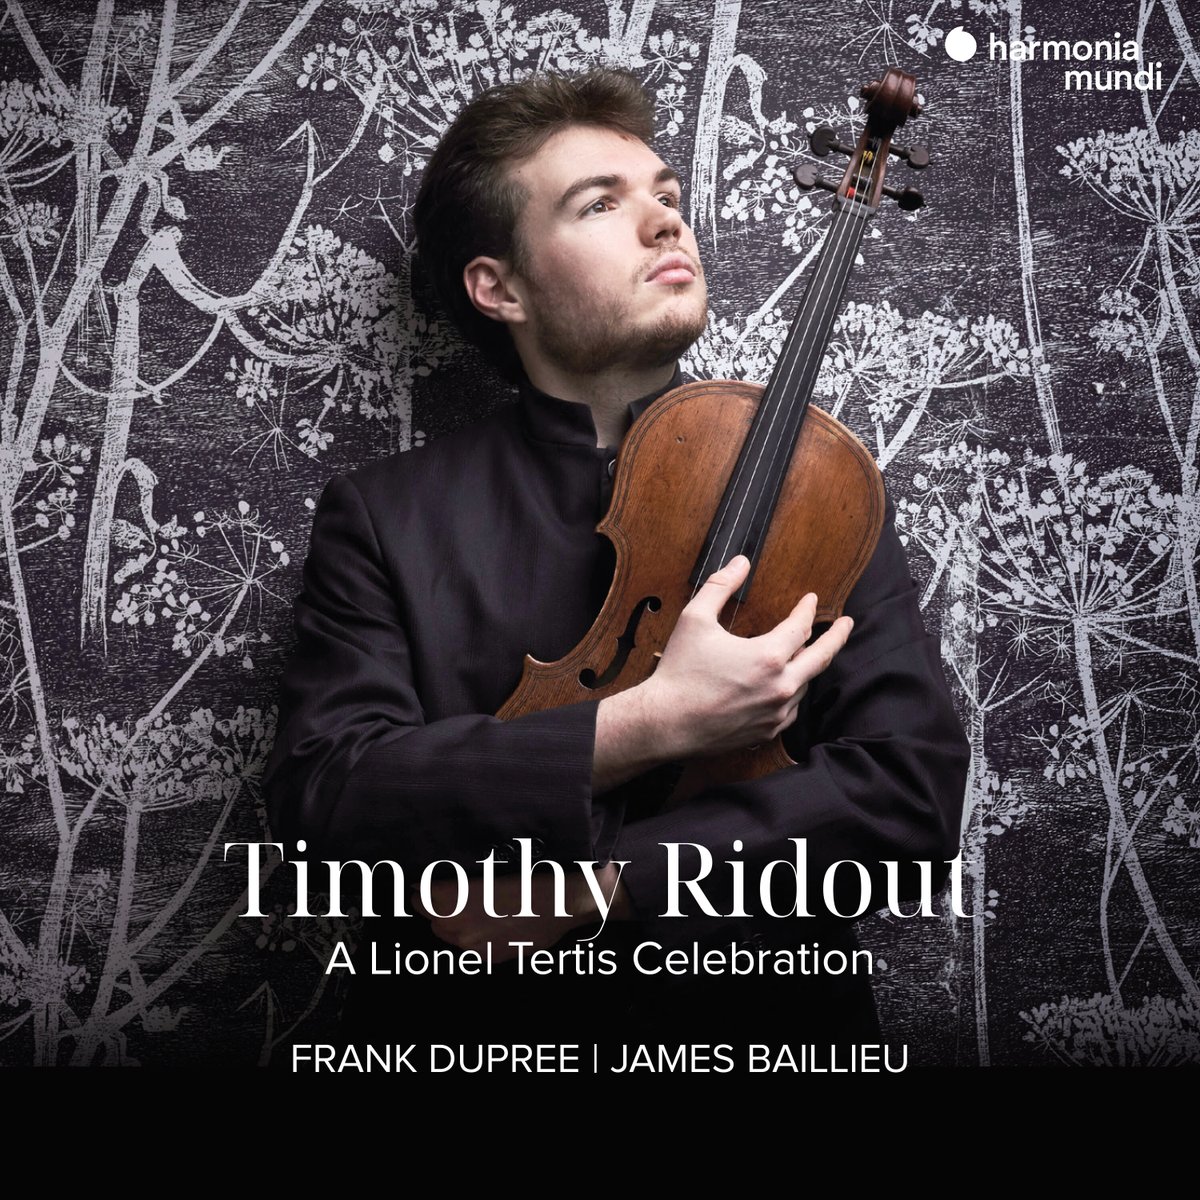 Read this article about our Classical Recording of the Week, 'A Lionel Tertis Celebration' from @RidoutTimothy, @frank_dupree and @jbaillieu! 📖 Read here: tinyurl.com/ye28th5r 📀 Order here (released on @harmoniamundi_inter): tinyurl.com/yc6evzk5